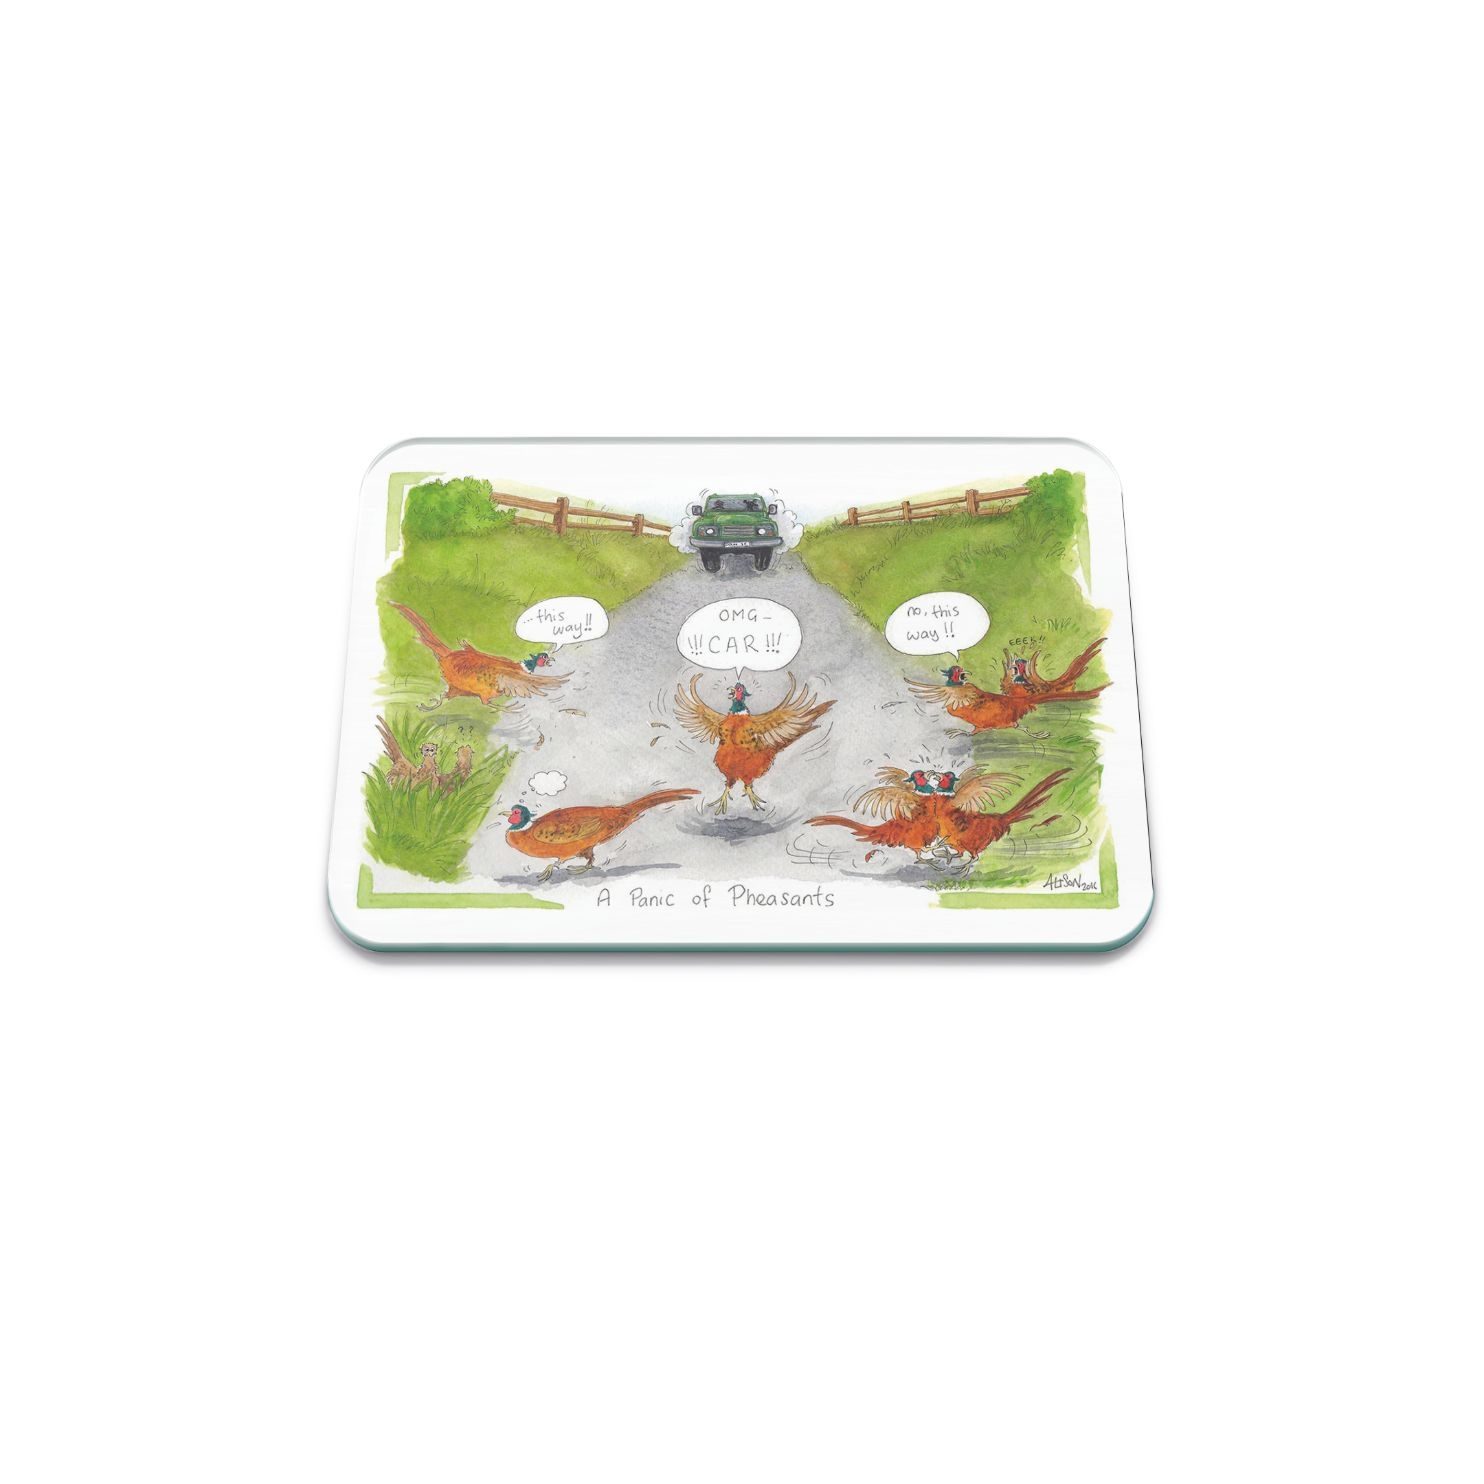 A PANIC OF PHEASANTS GLASS WORKTOP PROTECTOR SMALL 30X22CM